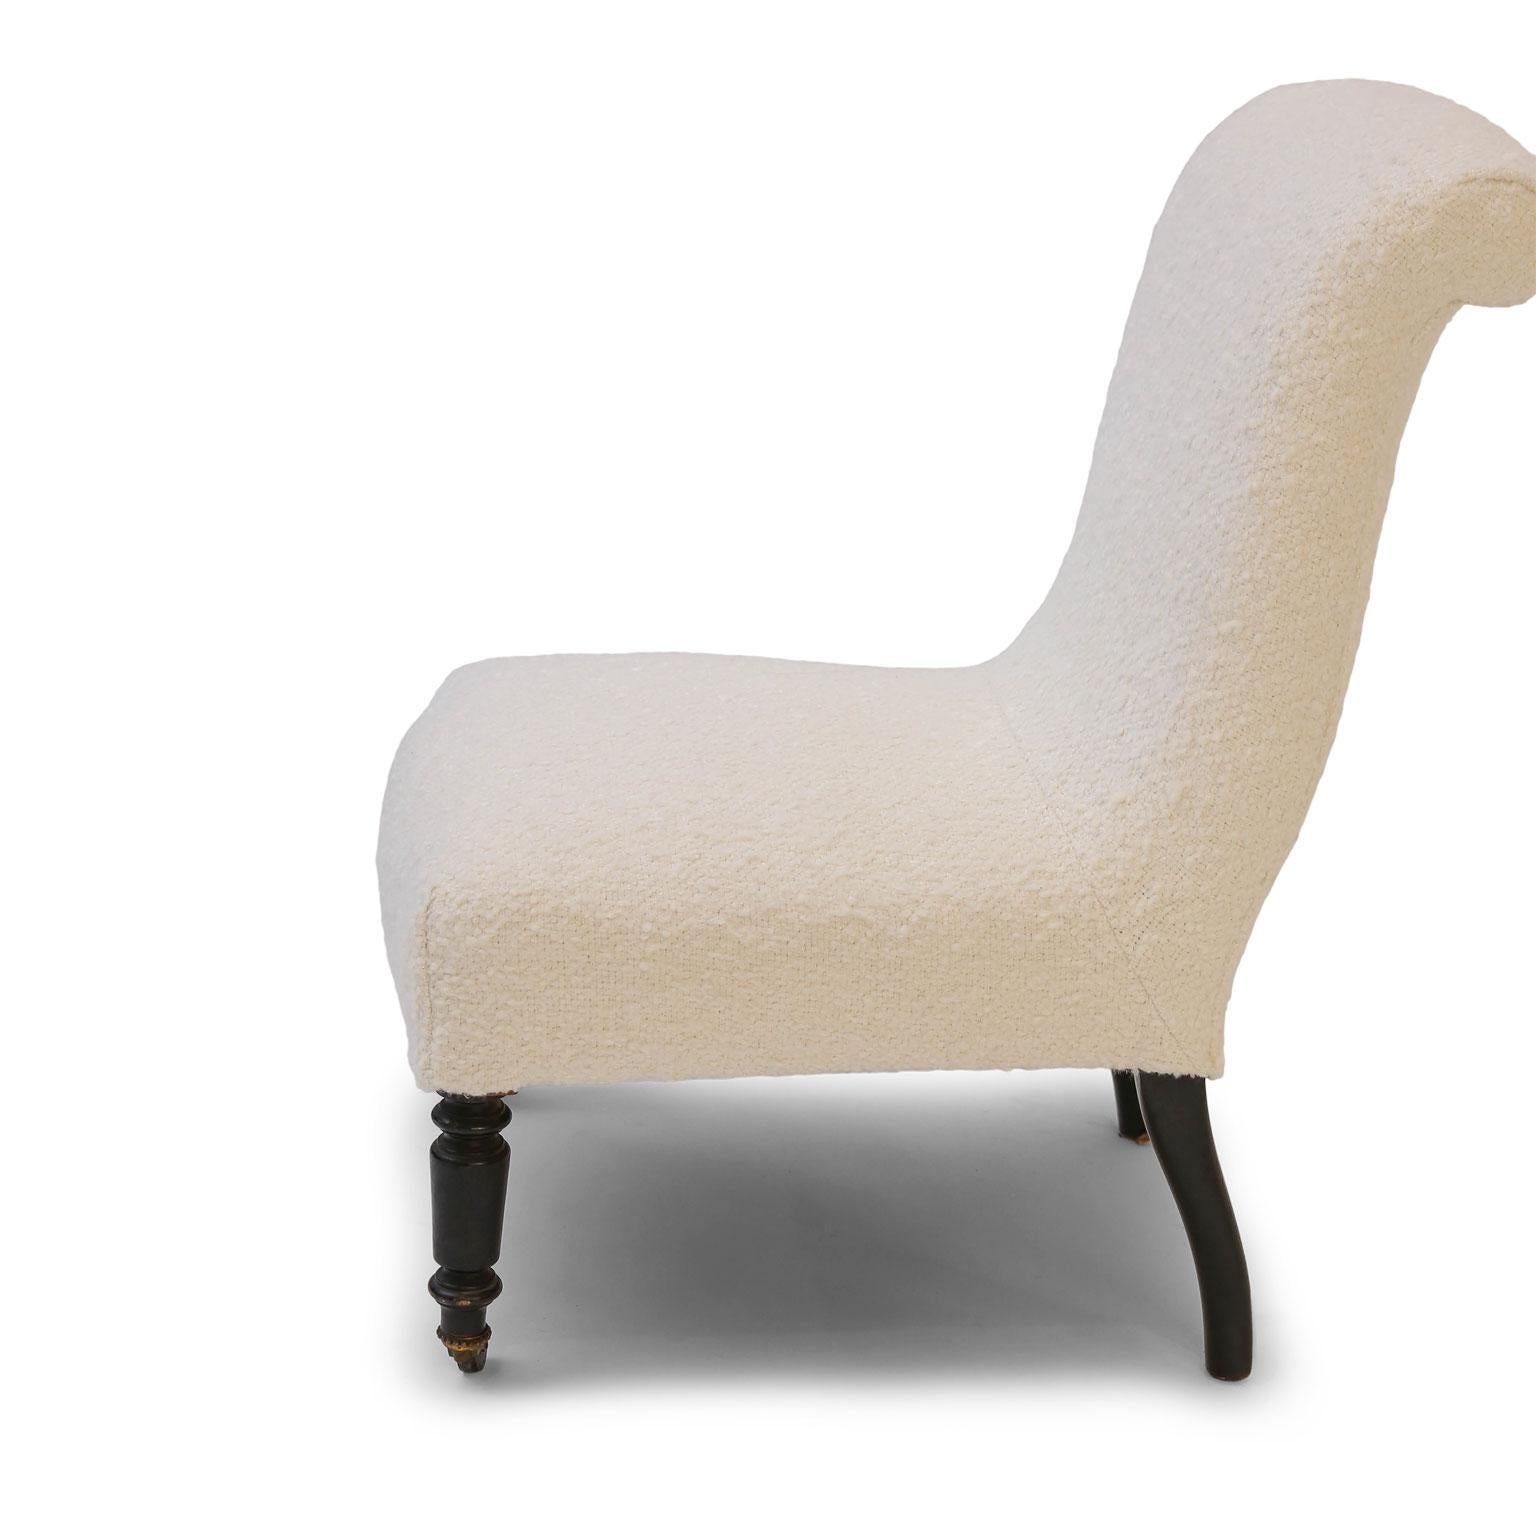 Napoleon III slipper chair newly covered in off-white Belgian wool bouclé. Upholstery and joints reworked. Front legs raised upon casters.